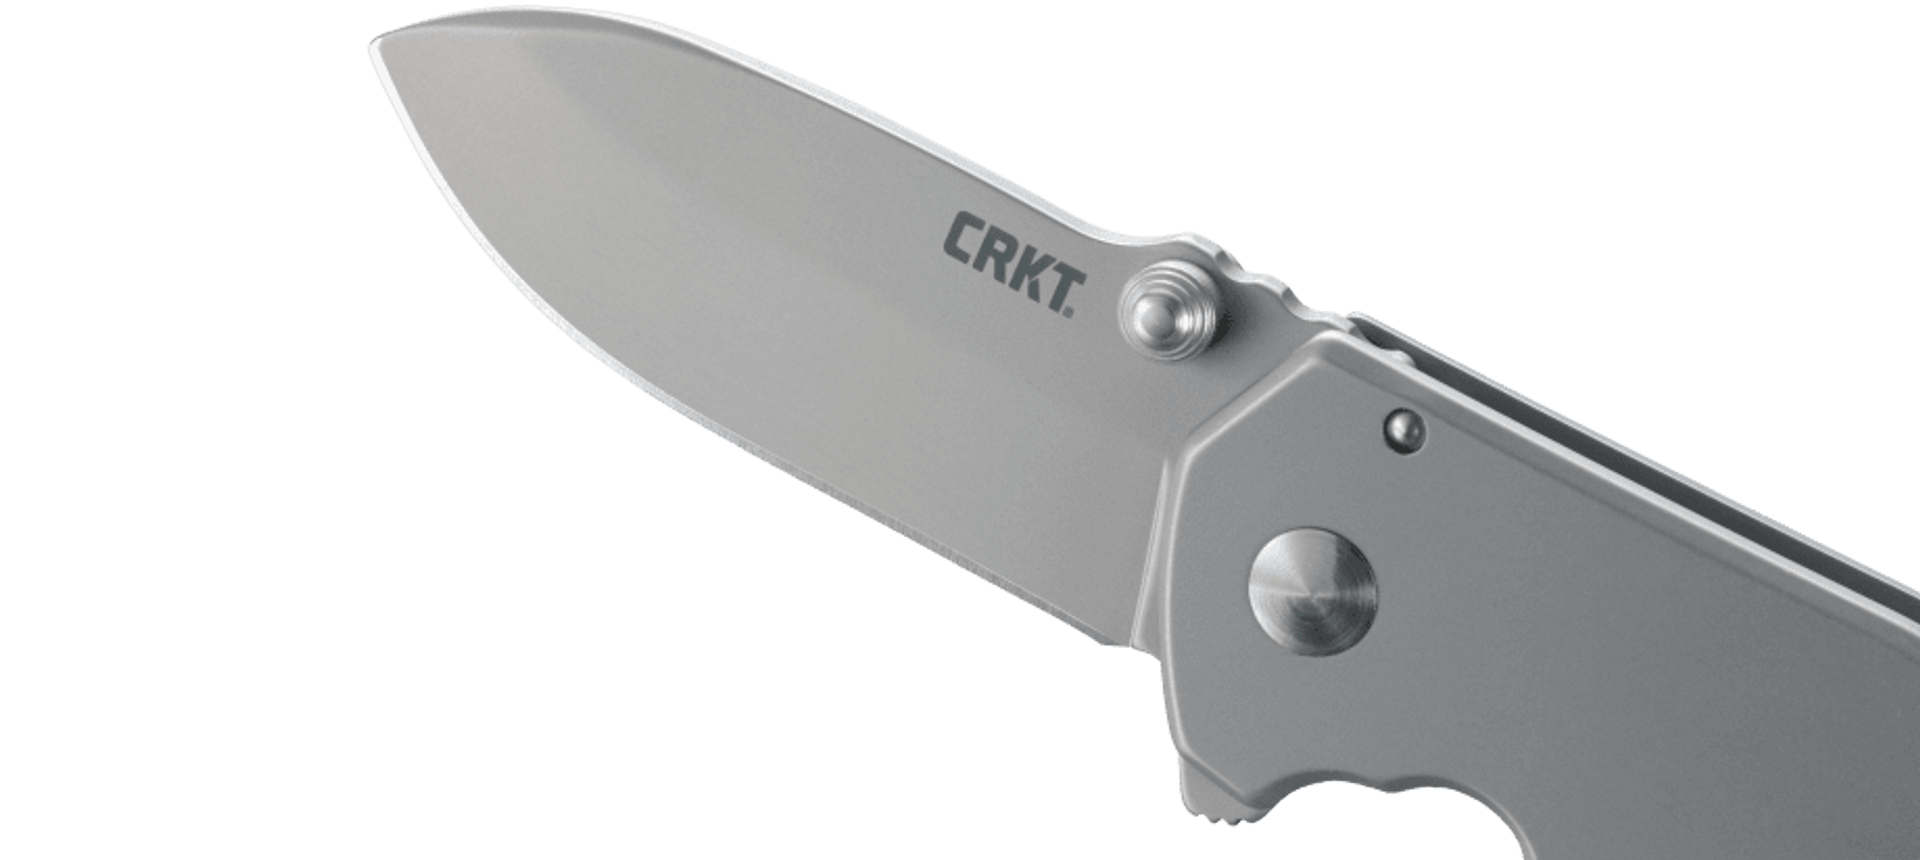 CRKT 2492 Squid Assisted Folding Knife - Silver | CRKT